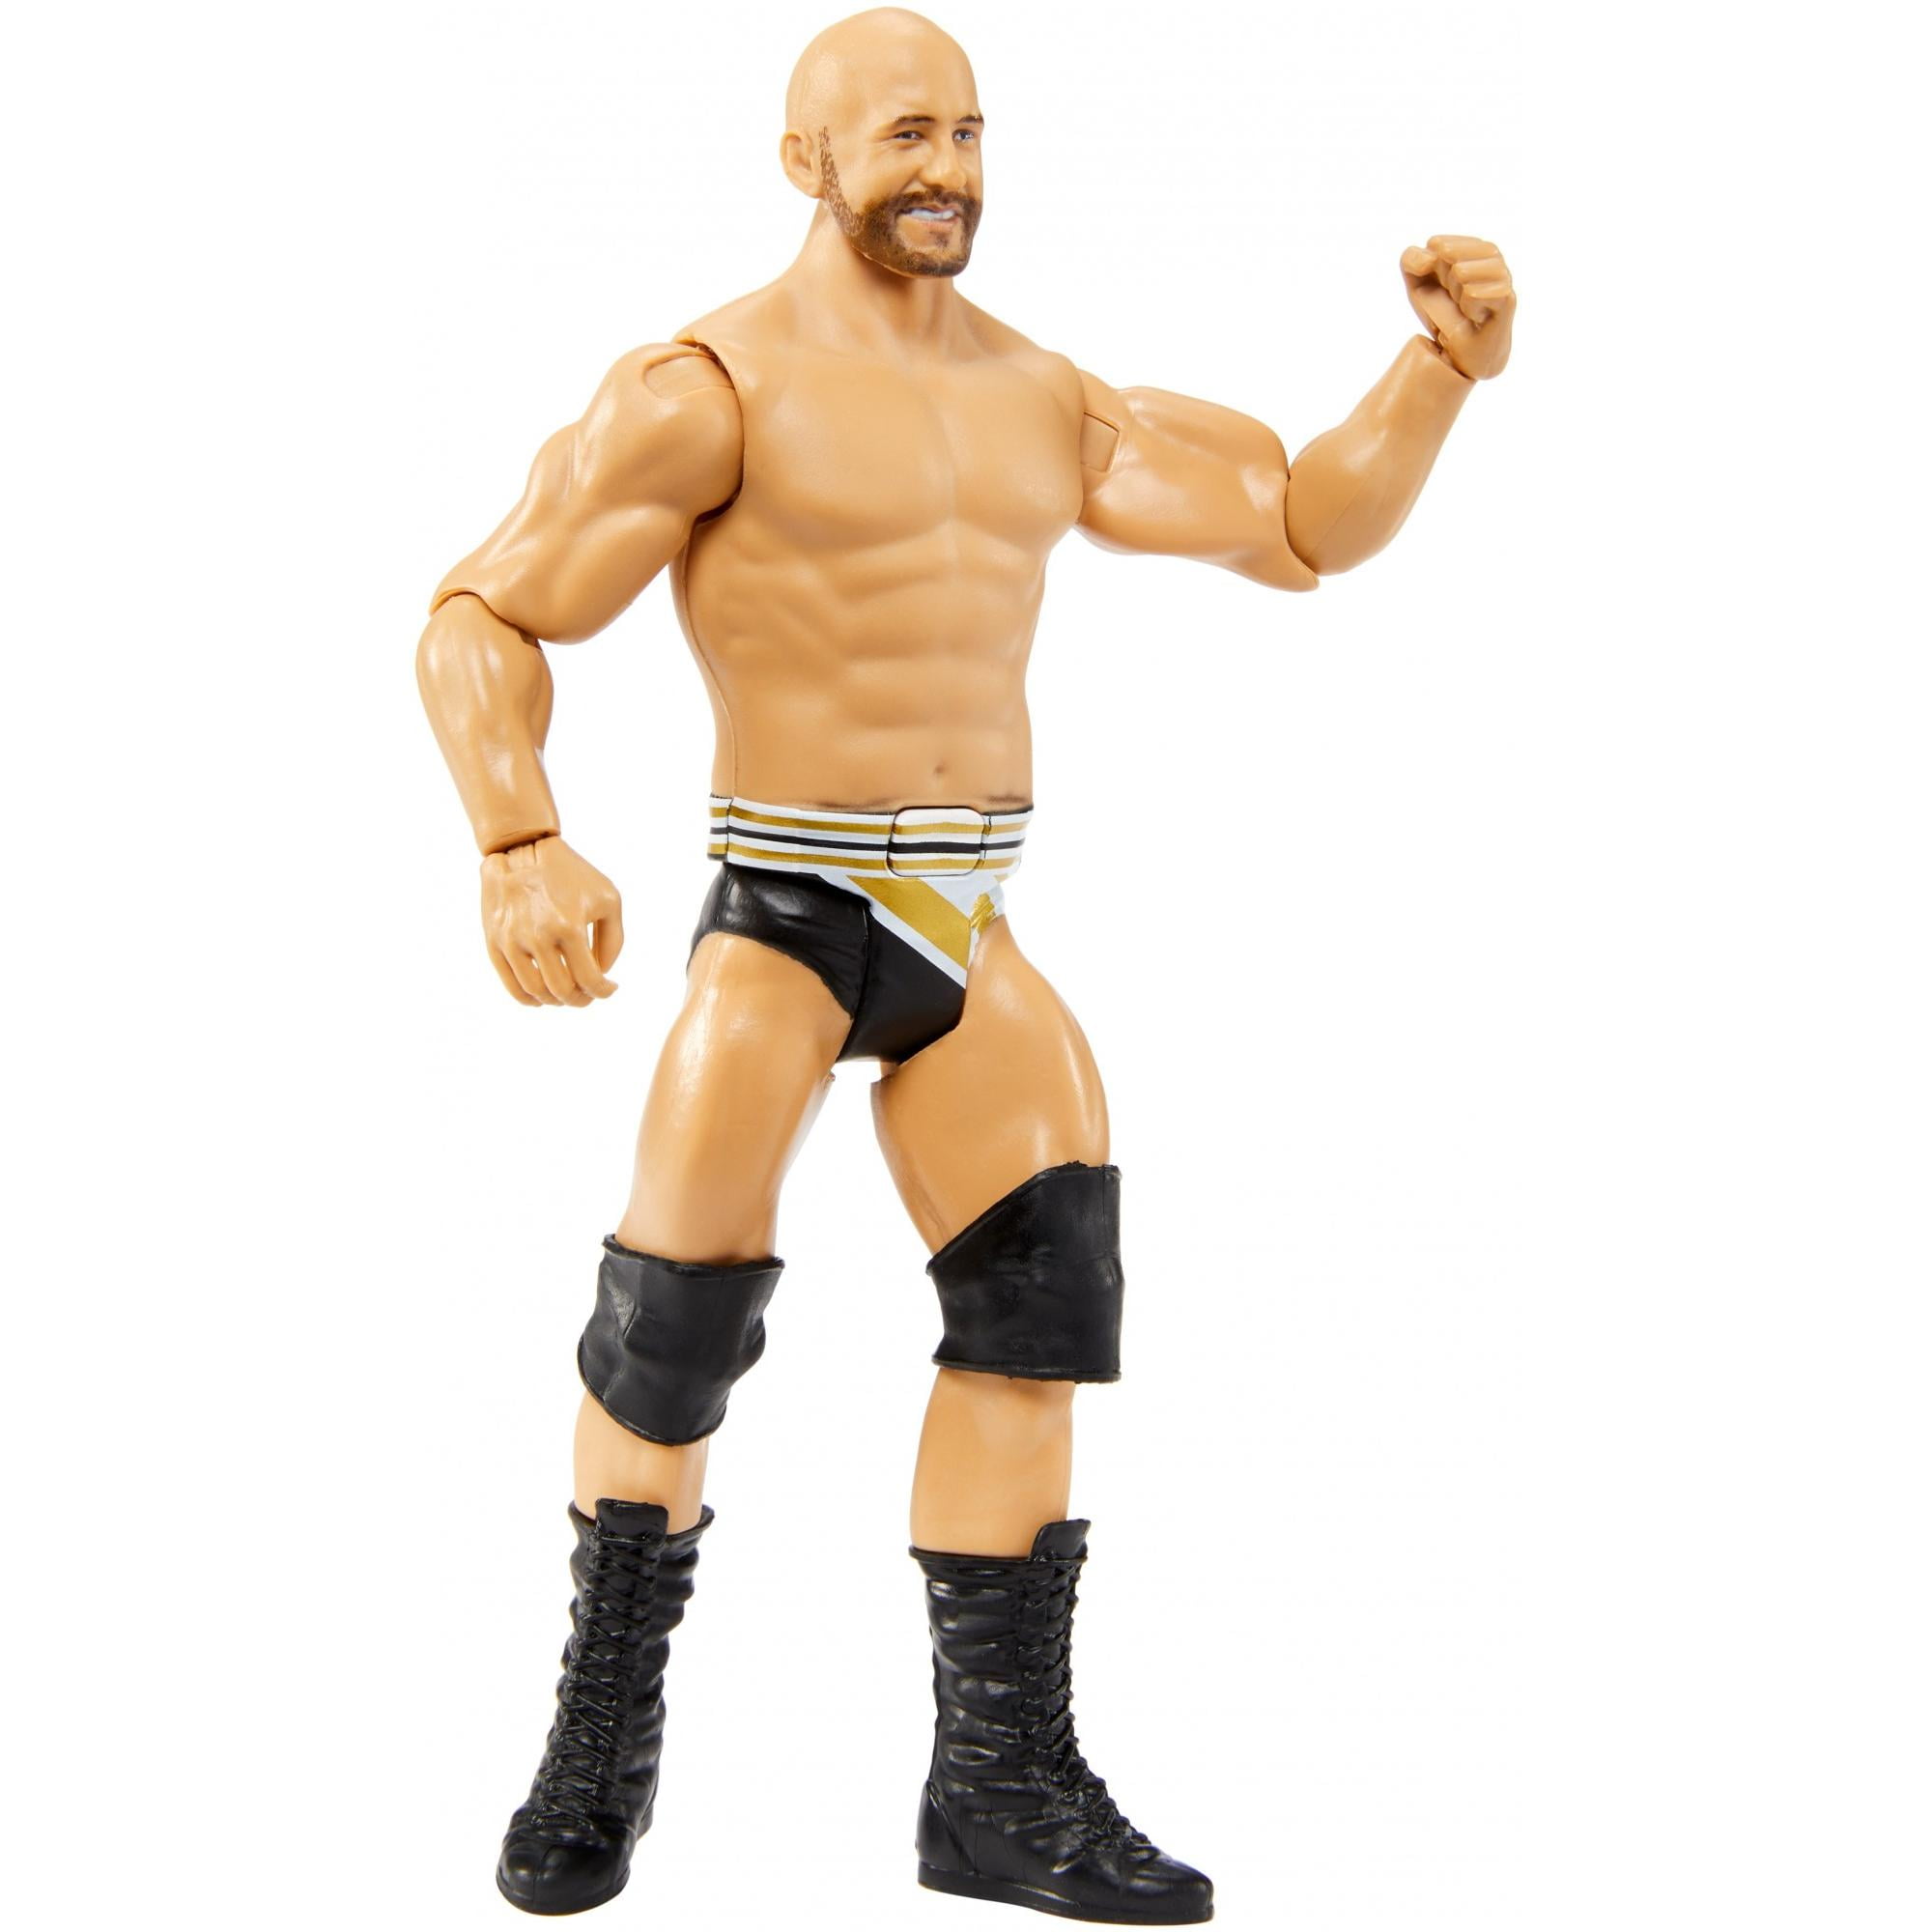 wwe sound slammers action figures